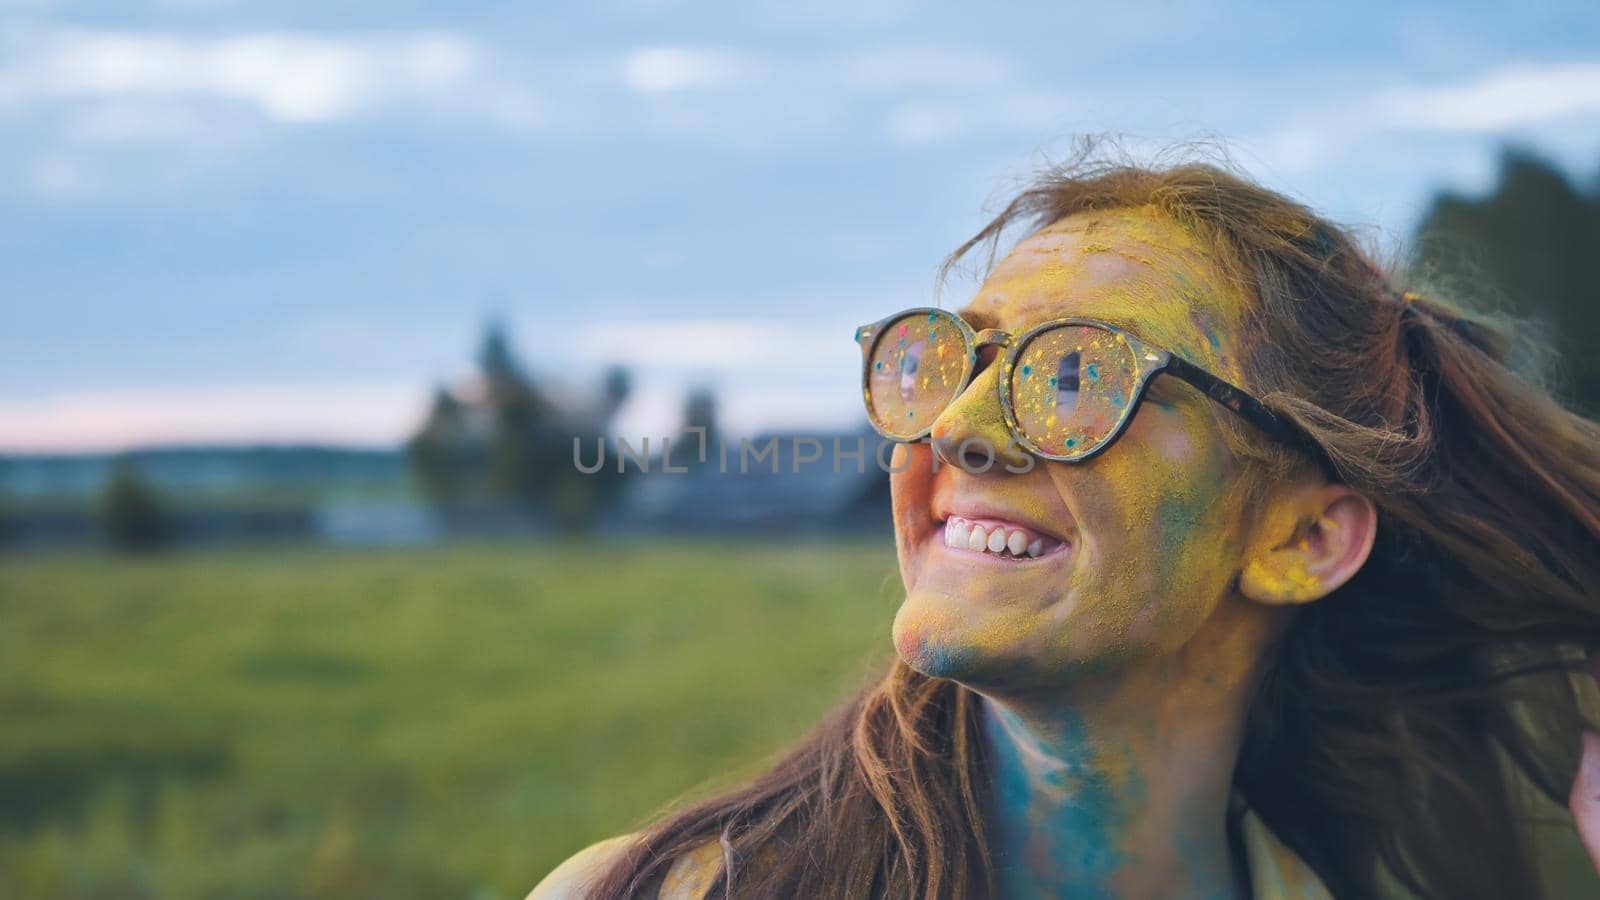 Cheerful girl posing smeared in multi-colored powder. by DovidPro